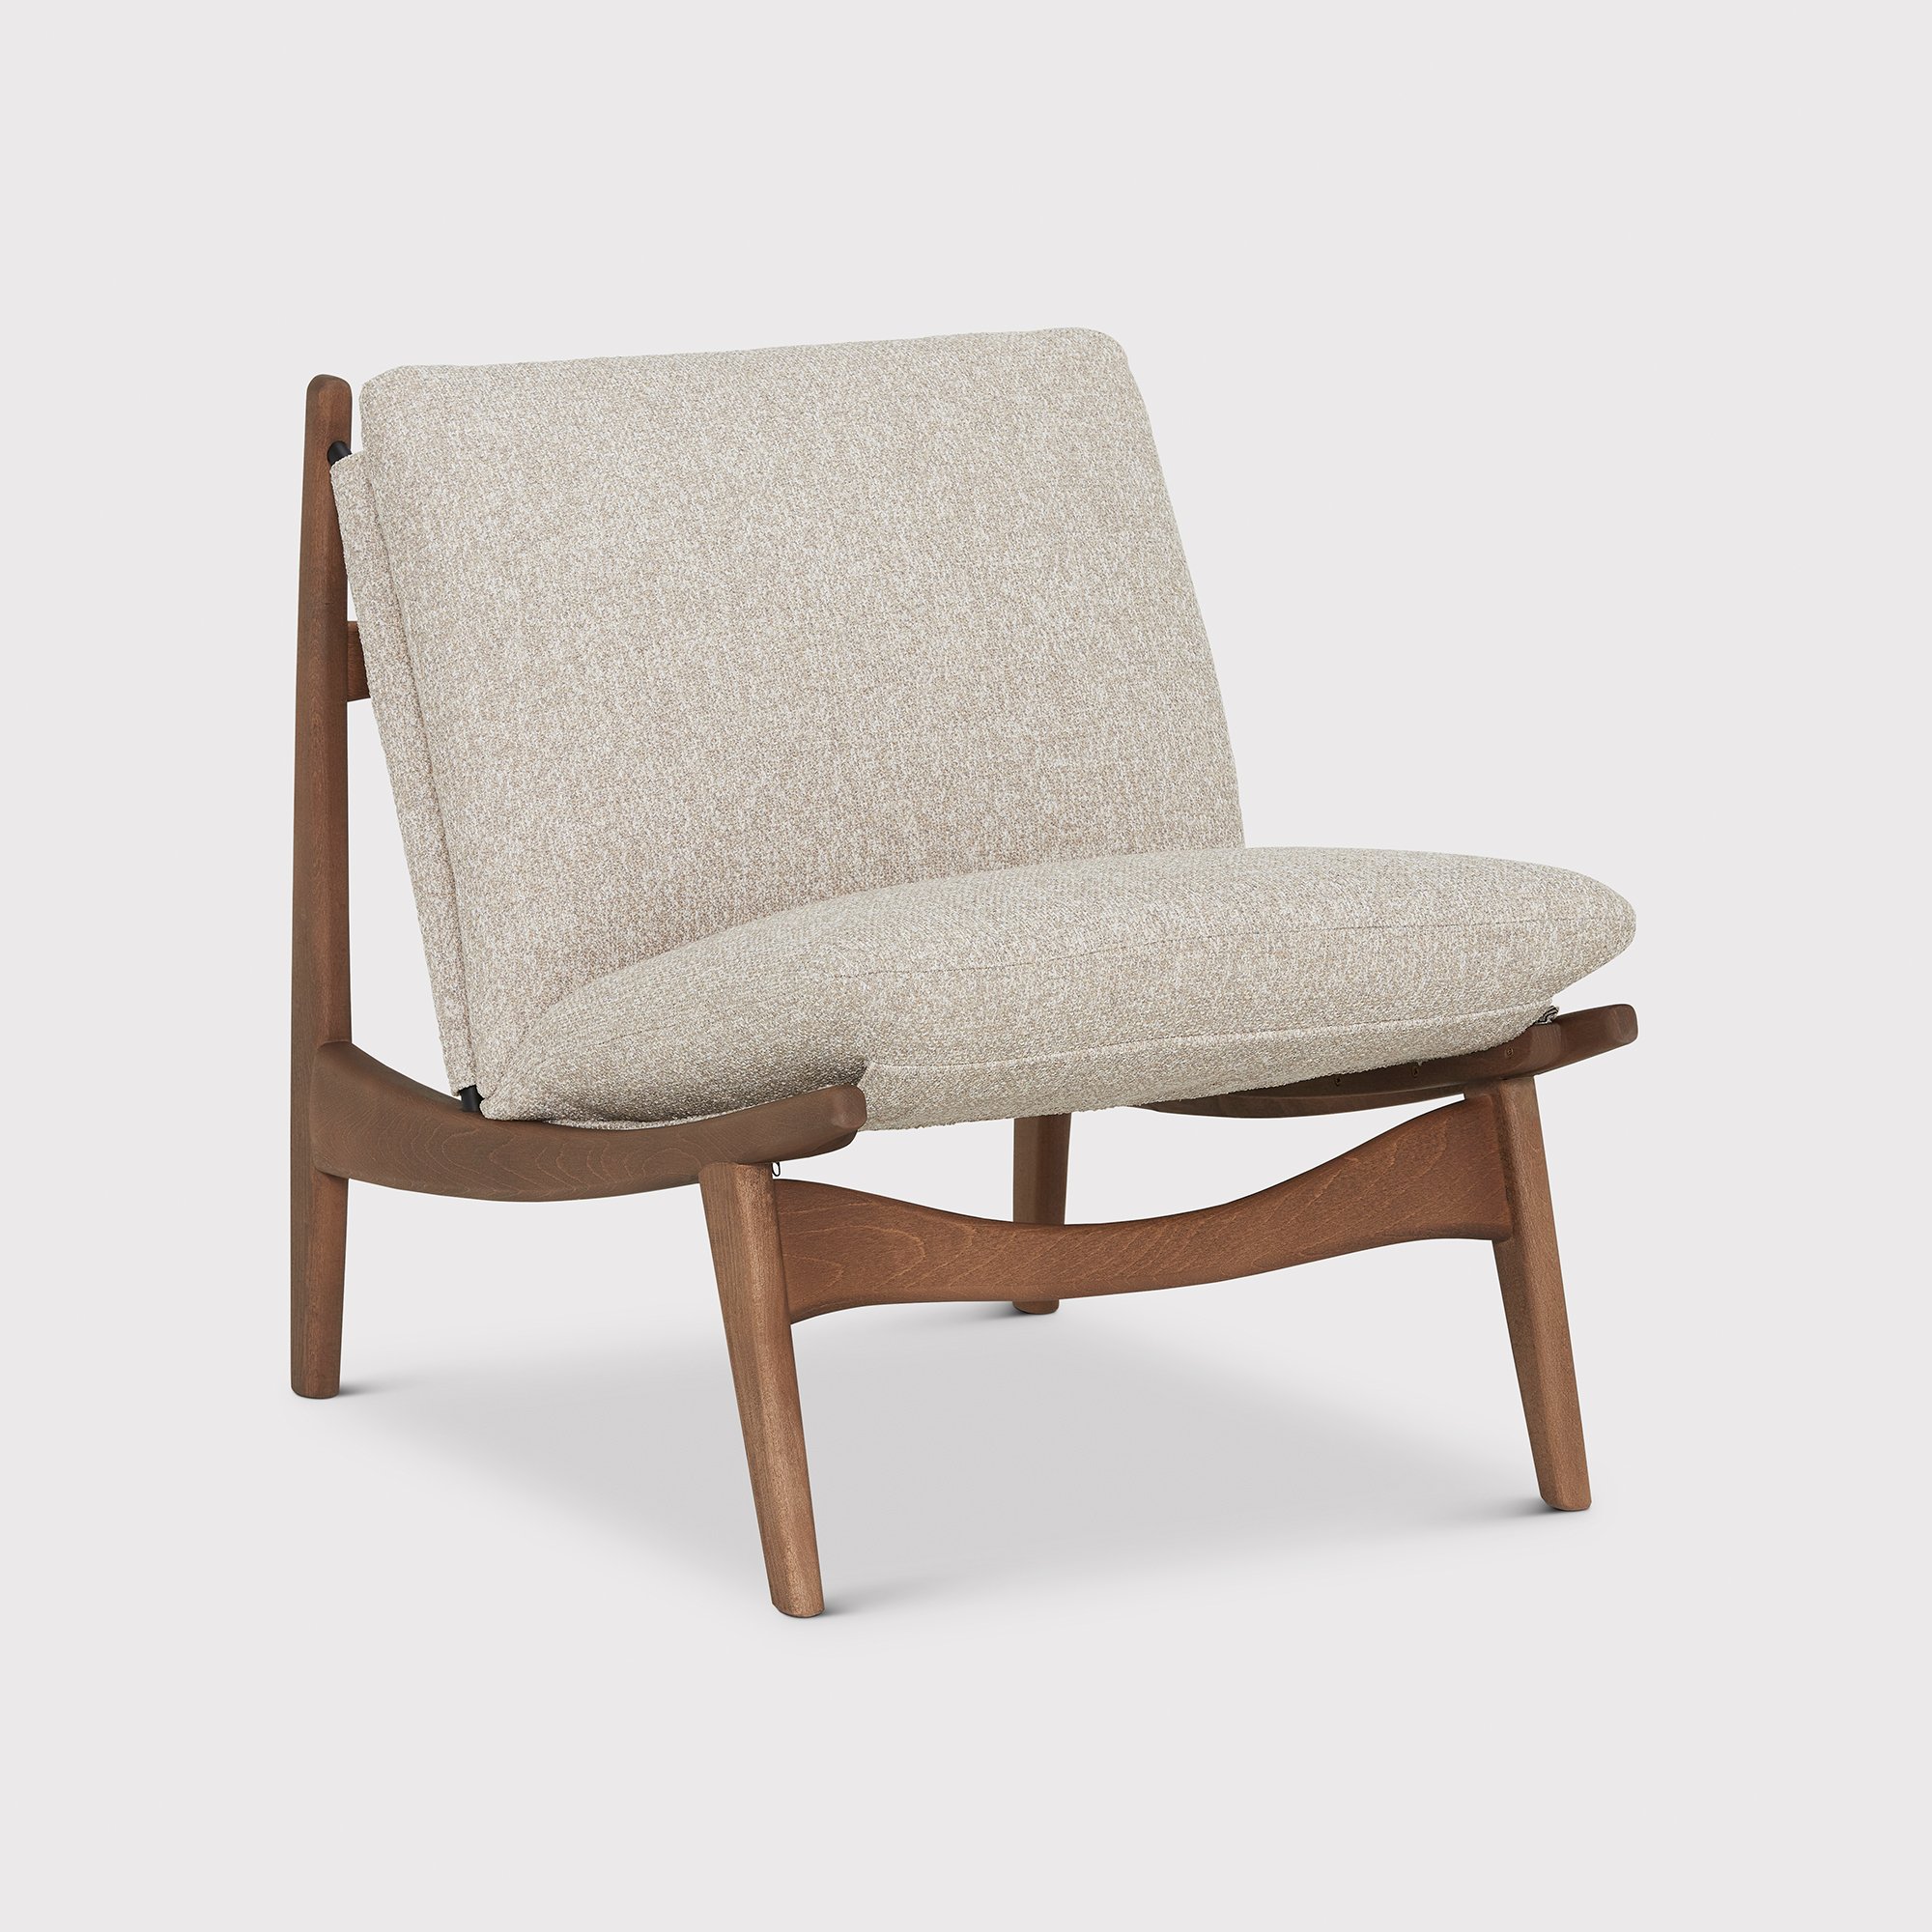 Pure Furniture Arbor Club Accent Chair With Wooden Legs, Neutral Fabric | Barker & Stonehouse